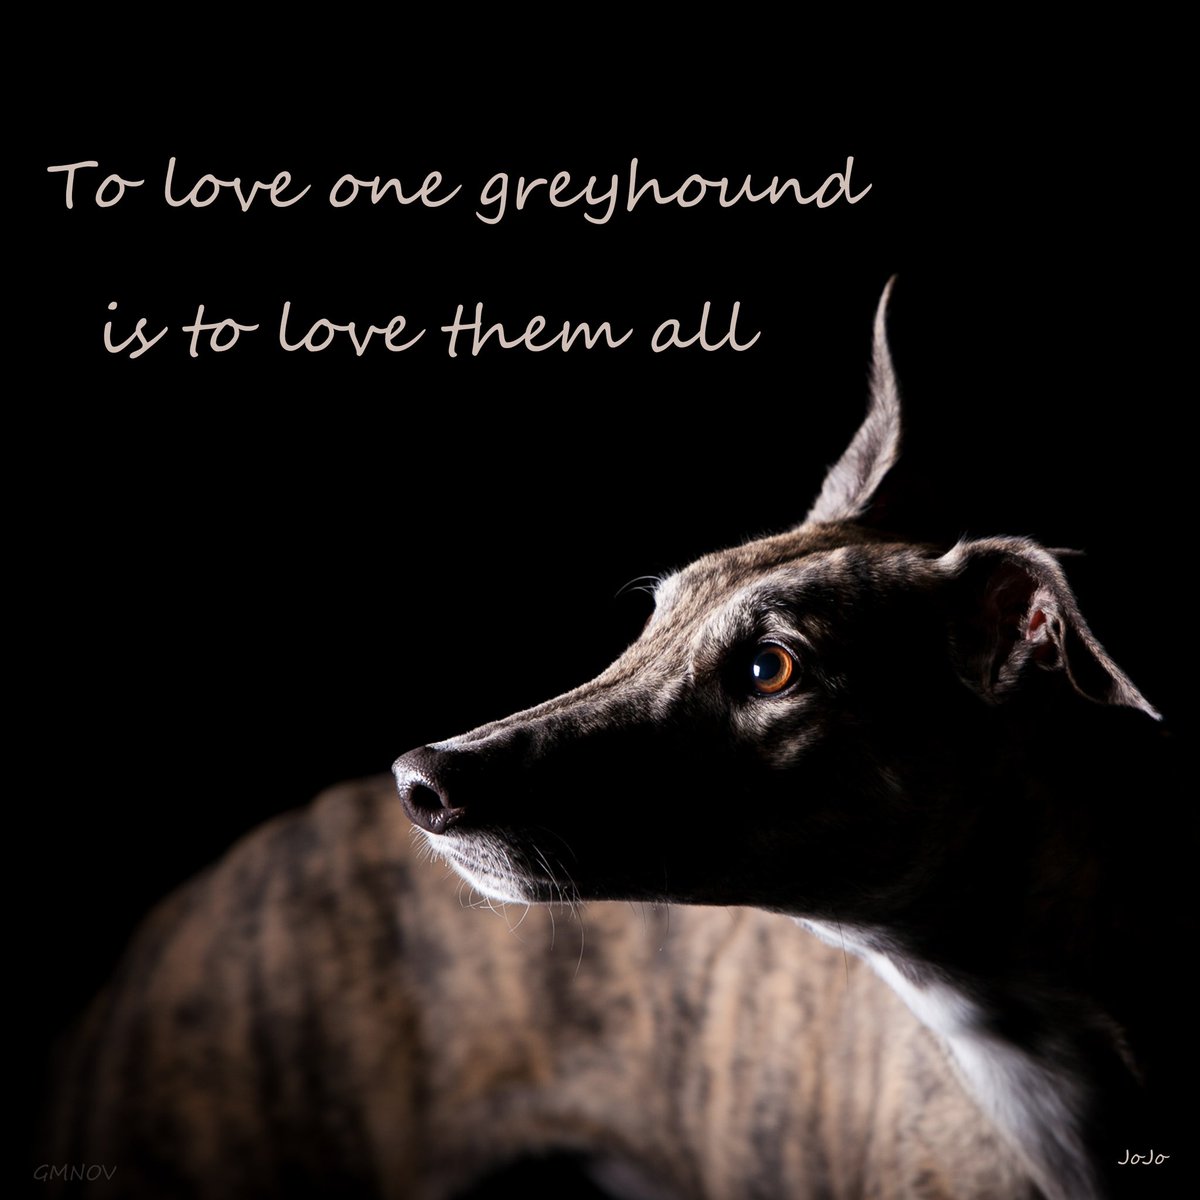 #truelove #valentinesday
#greyhounds #rescued #petsnotbets

💜🧡❤️